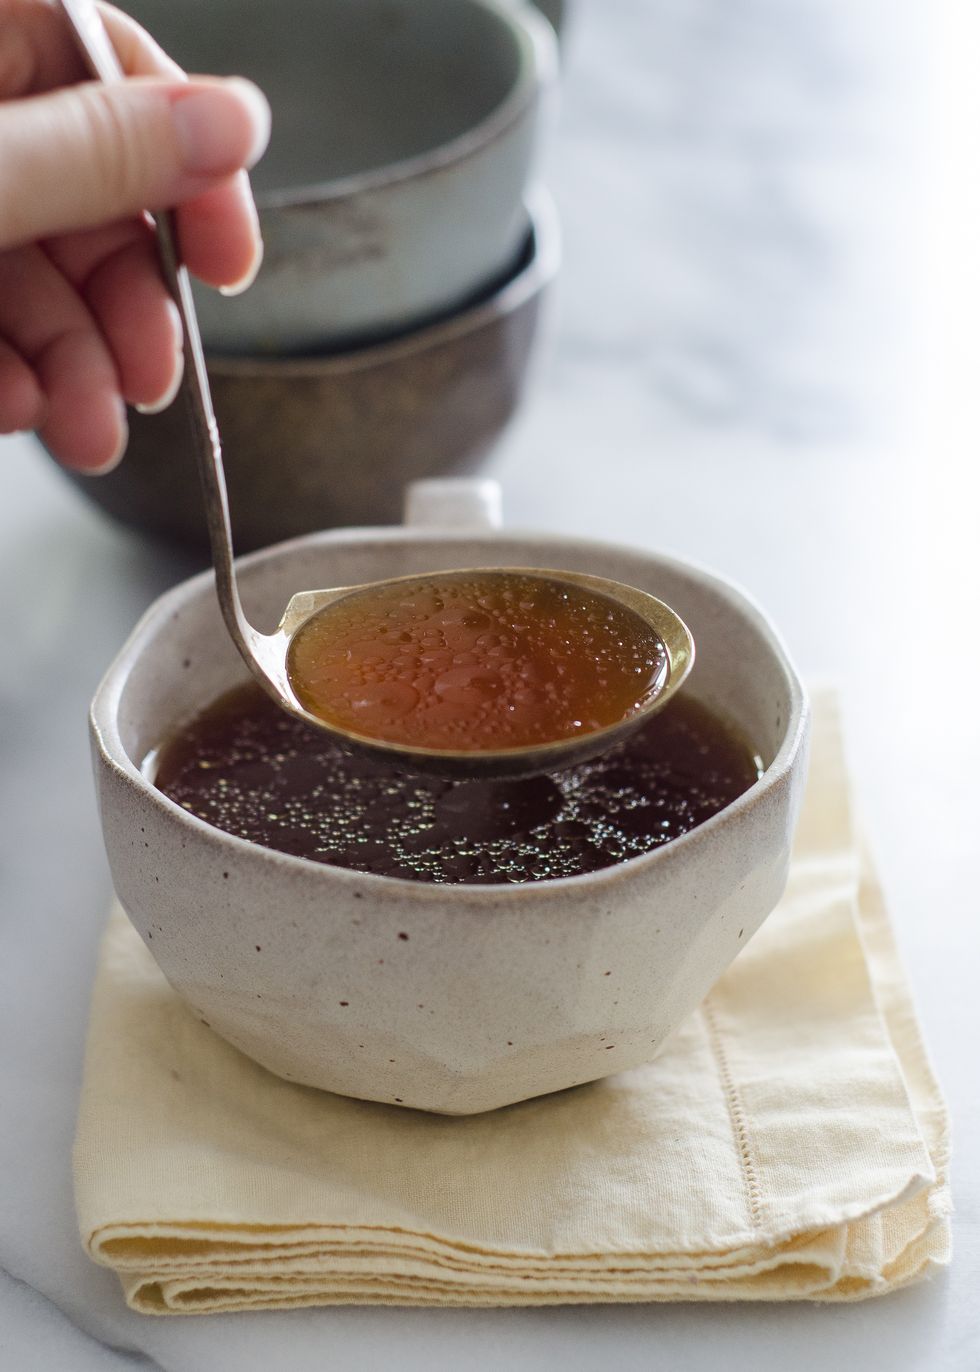 How To Make Beef Broth